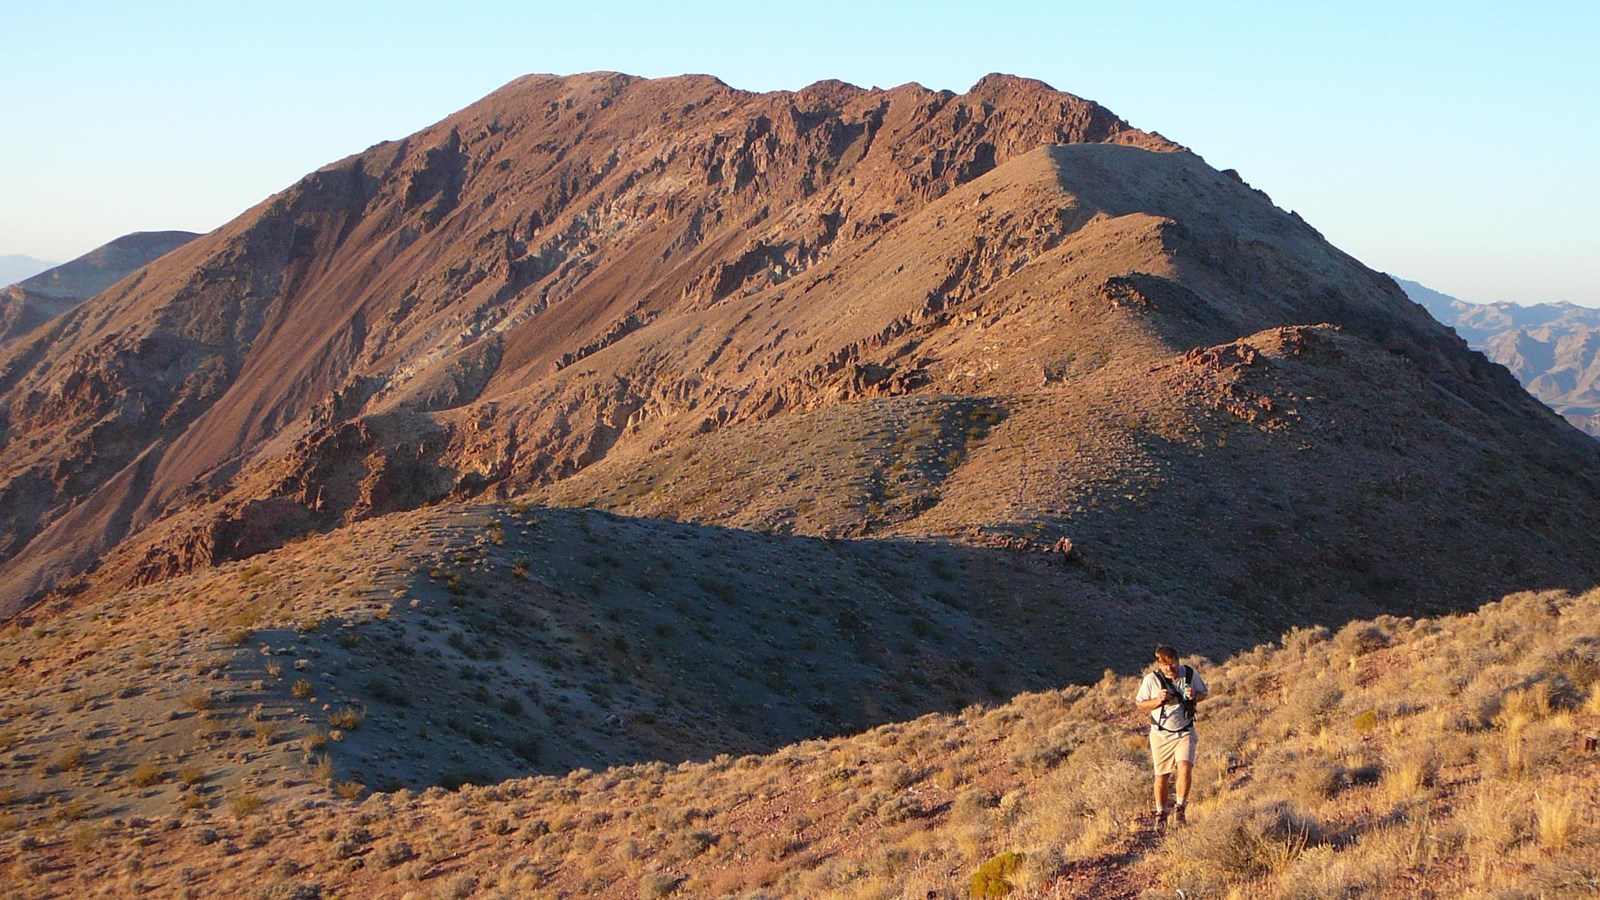 A hiker walks toward the camera on a wide undulating desert ridge covered with small shrubs.